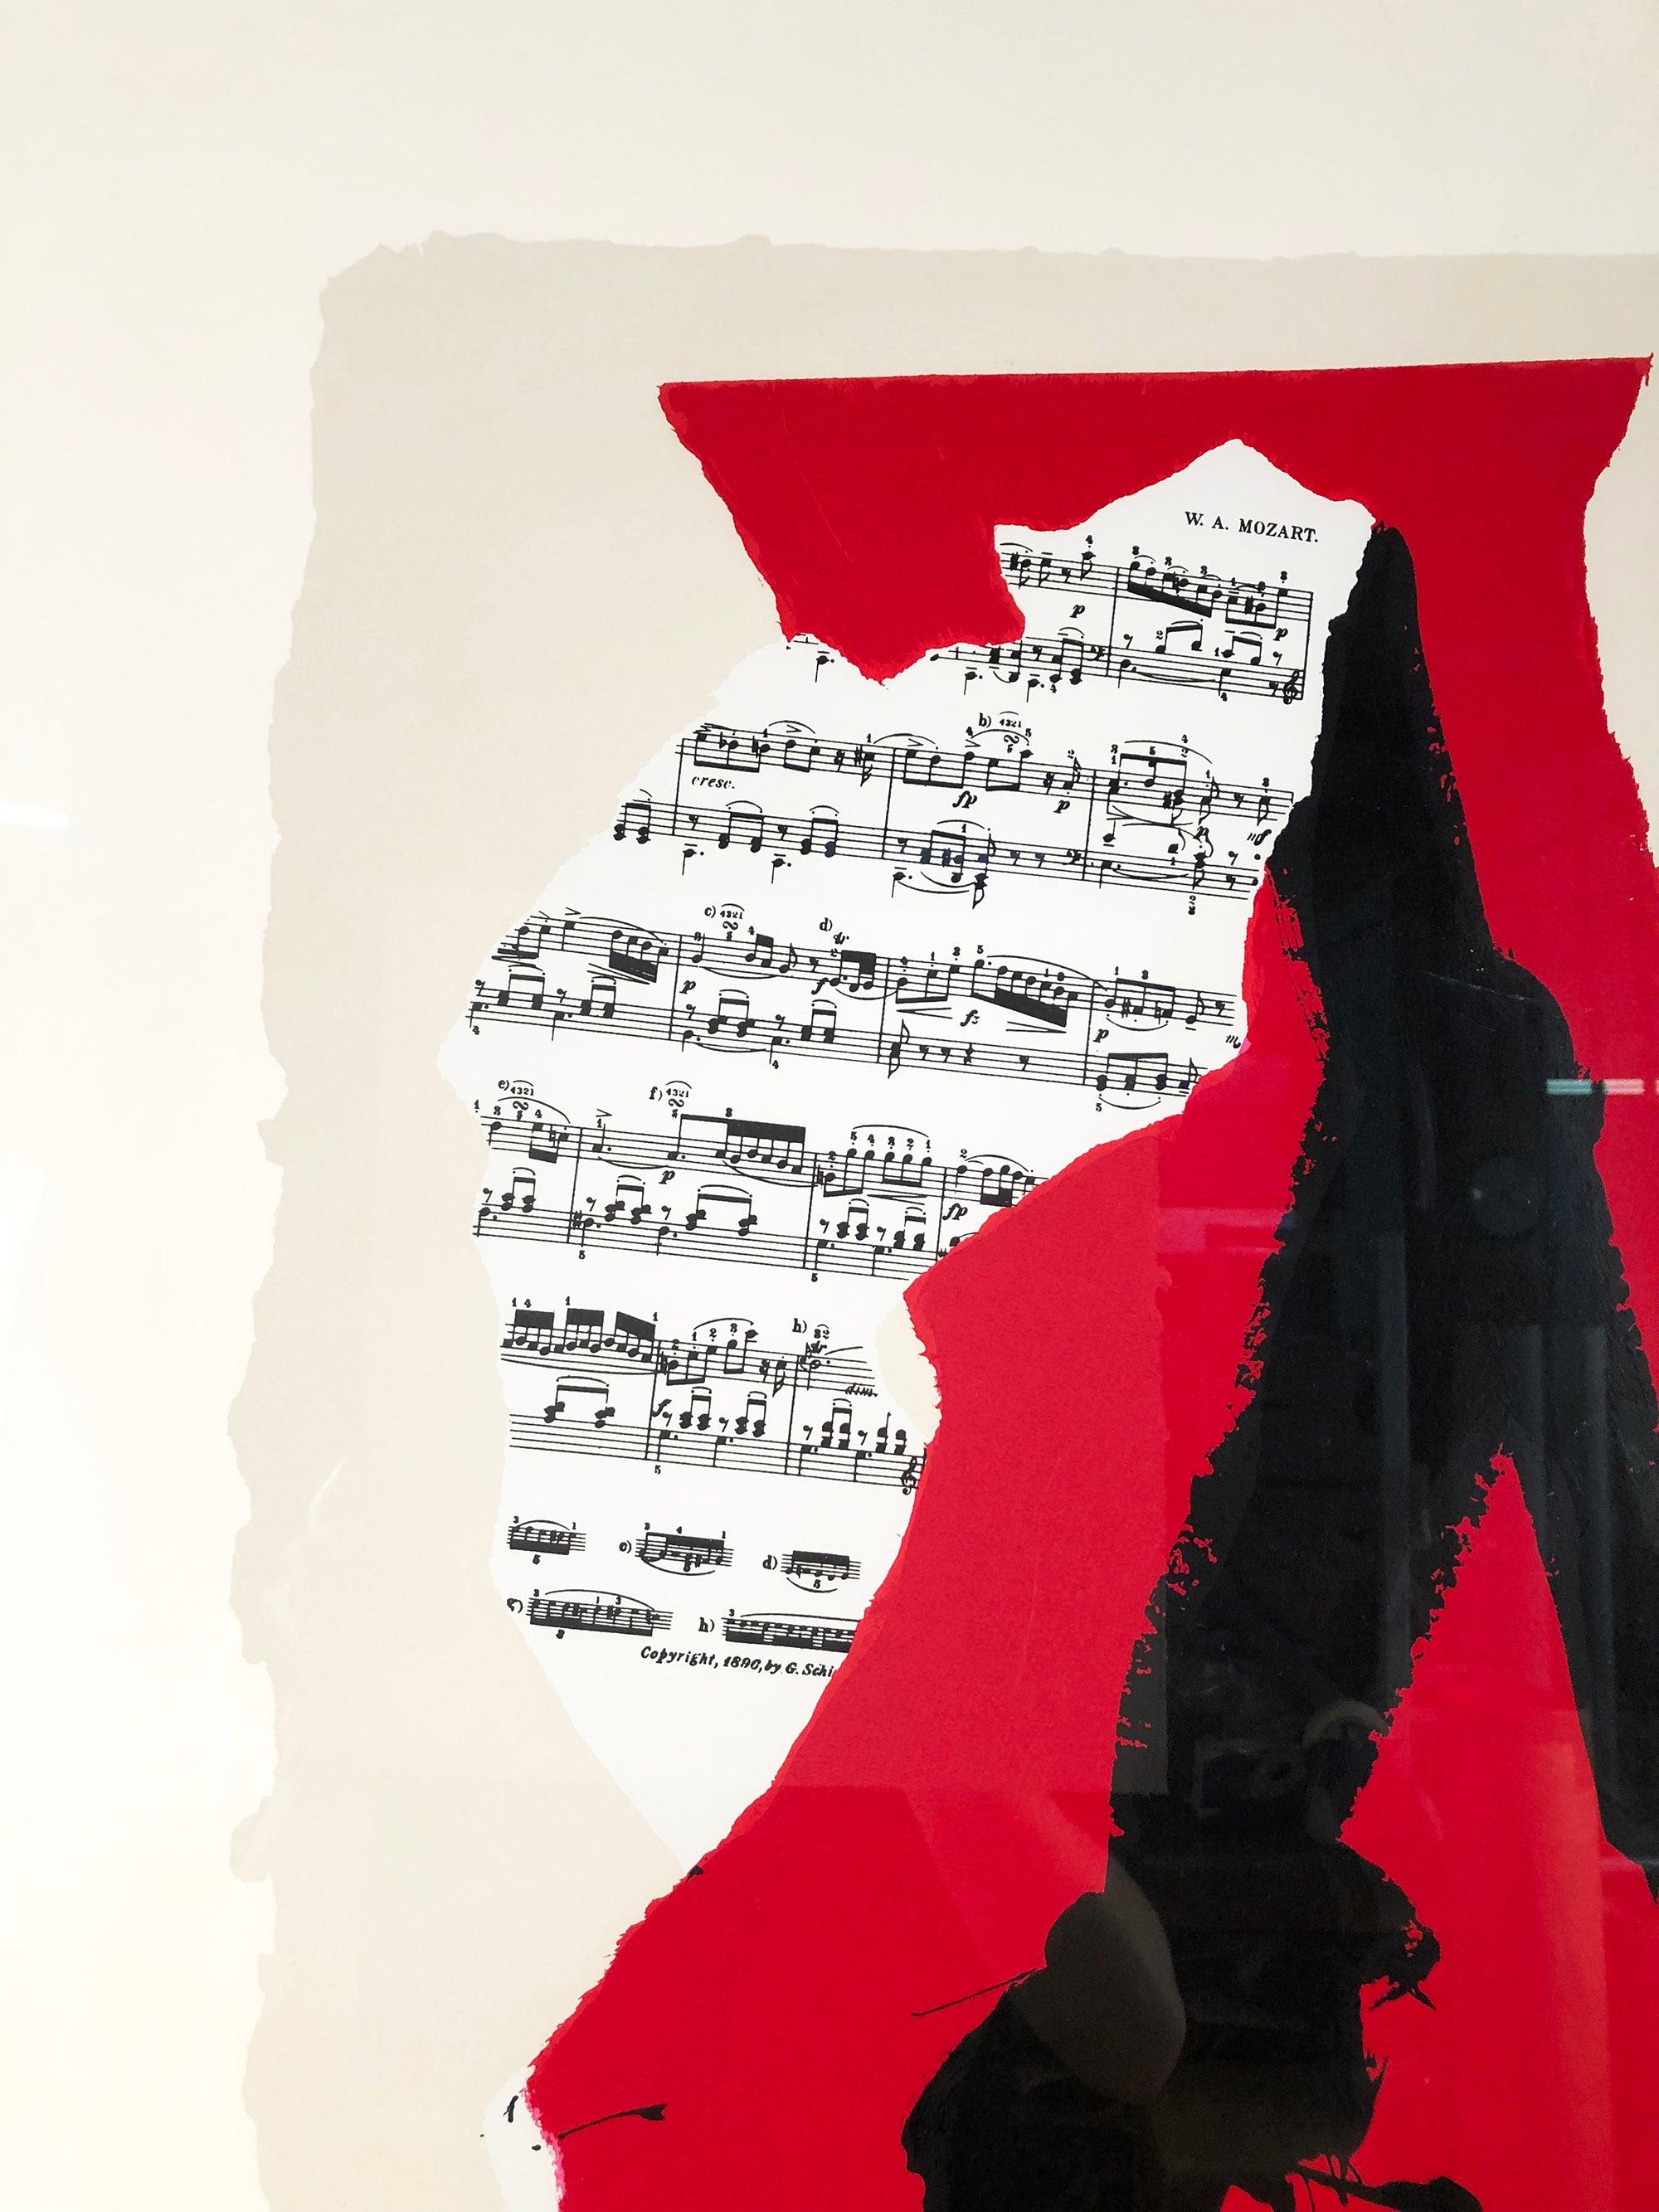 ROBERT MOTHERWELL Mostly Mozart Festival, 1991 First Edition - Contemporary Print by Robert Motherwell